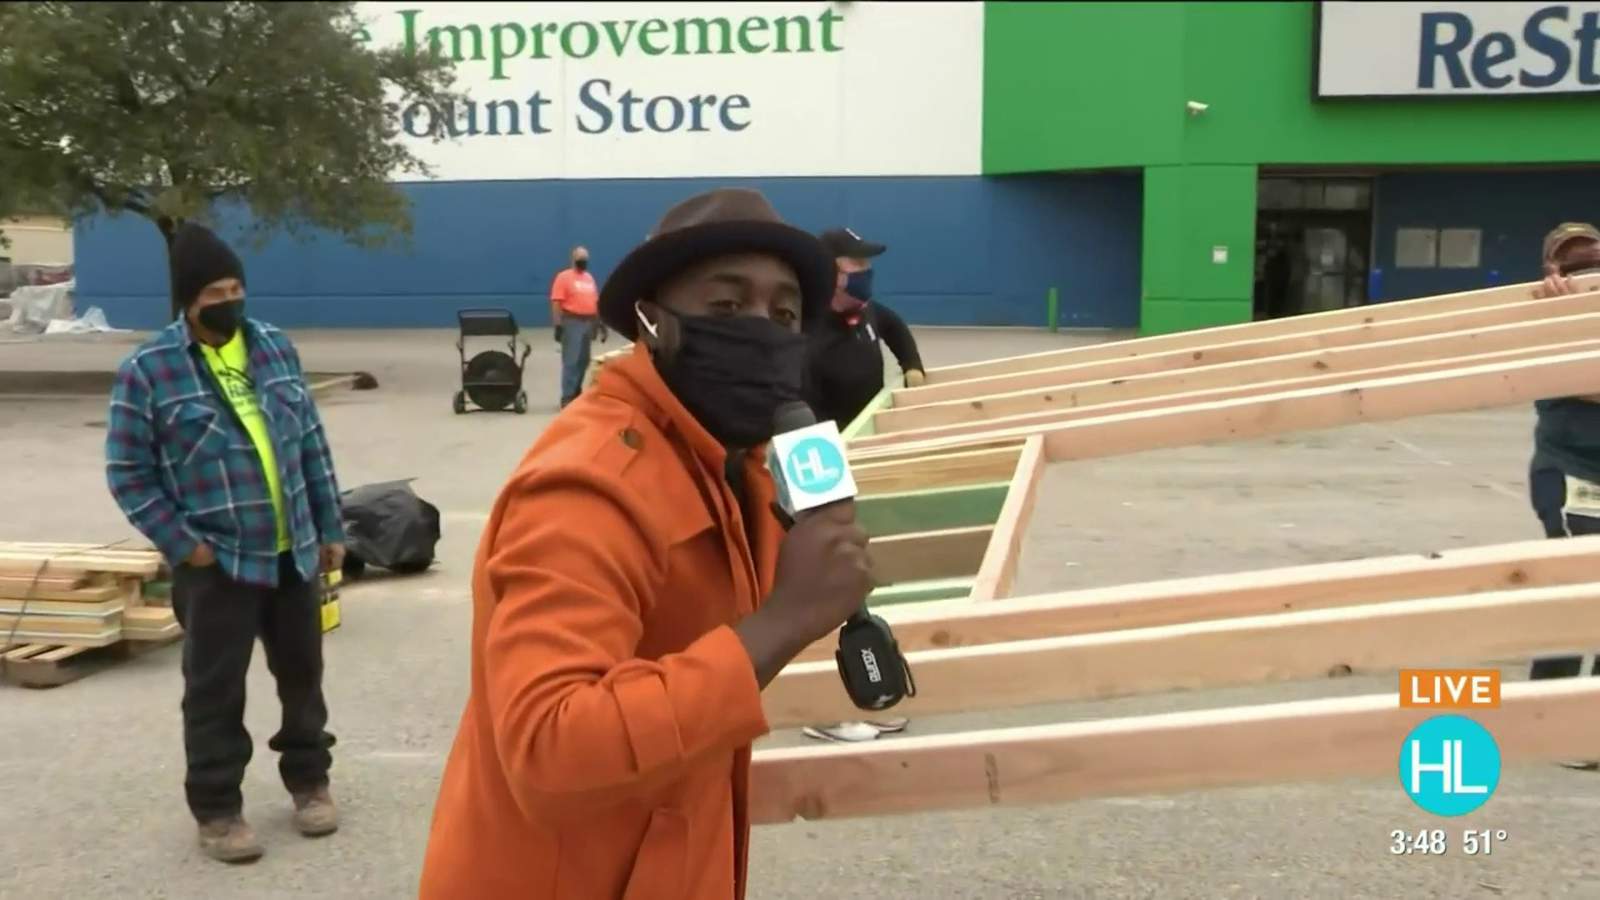 Houston Habitat for Humanity partners with KPRC 2 to help make dreams come true